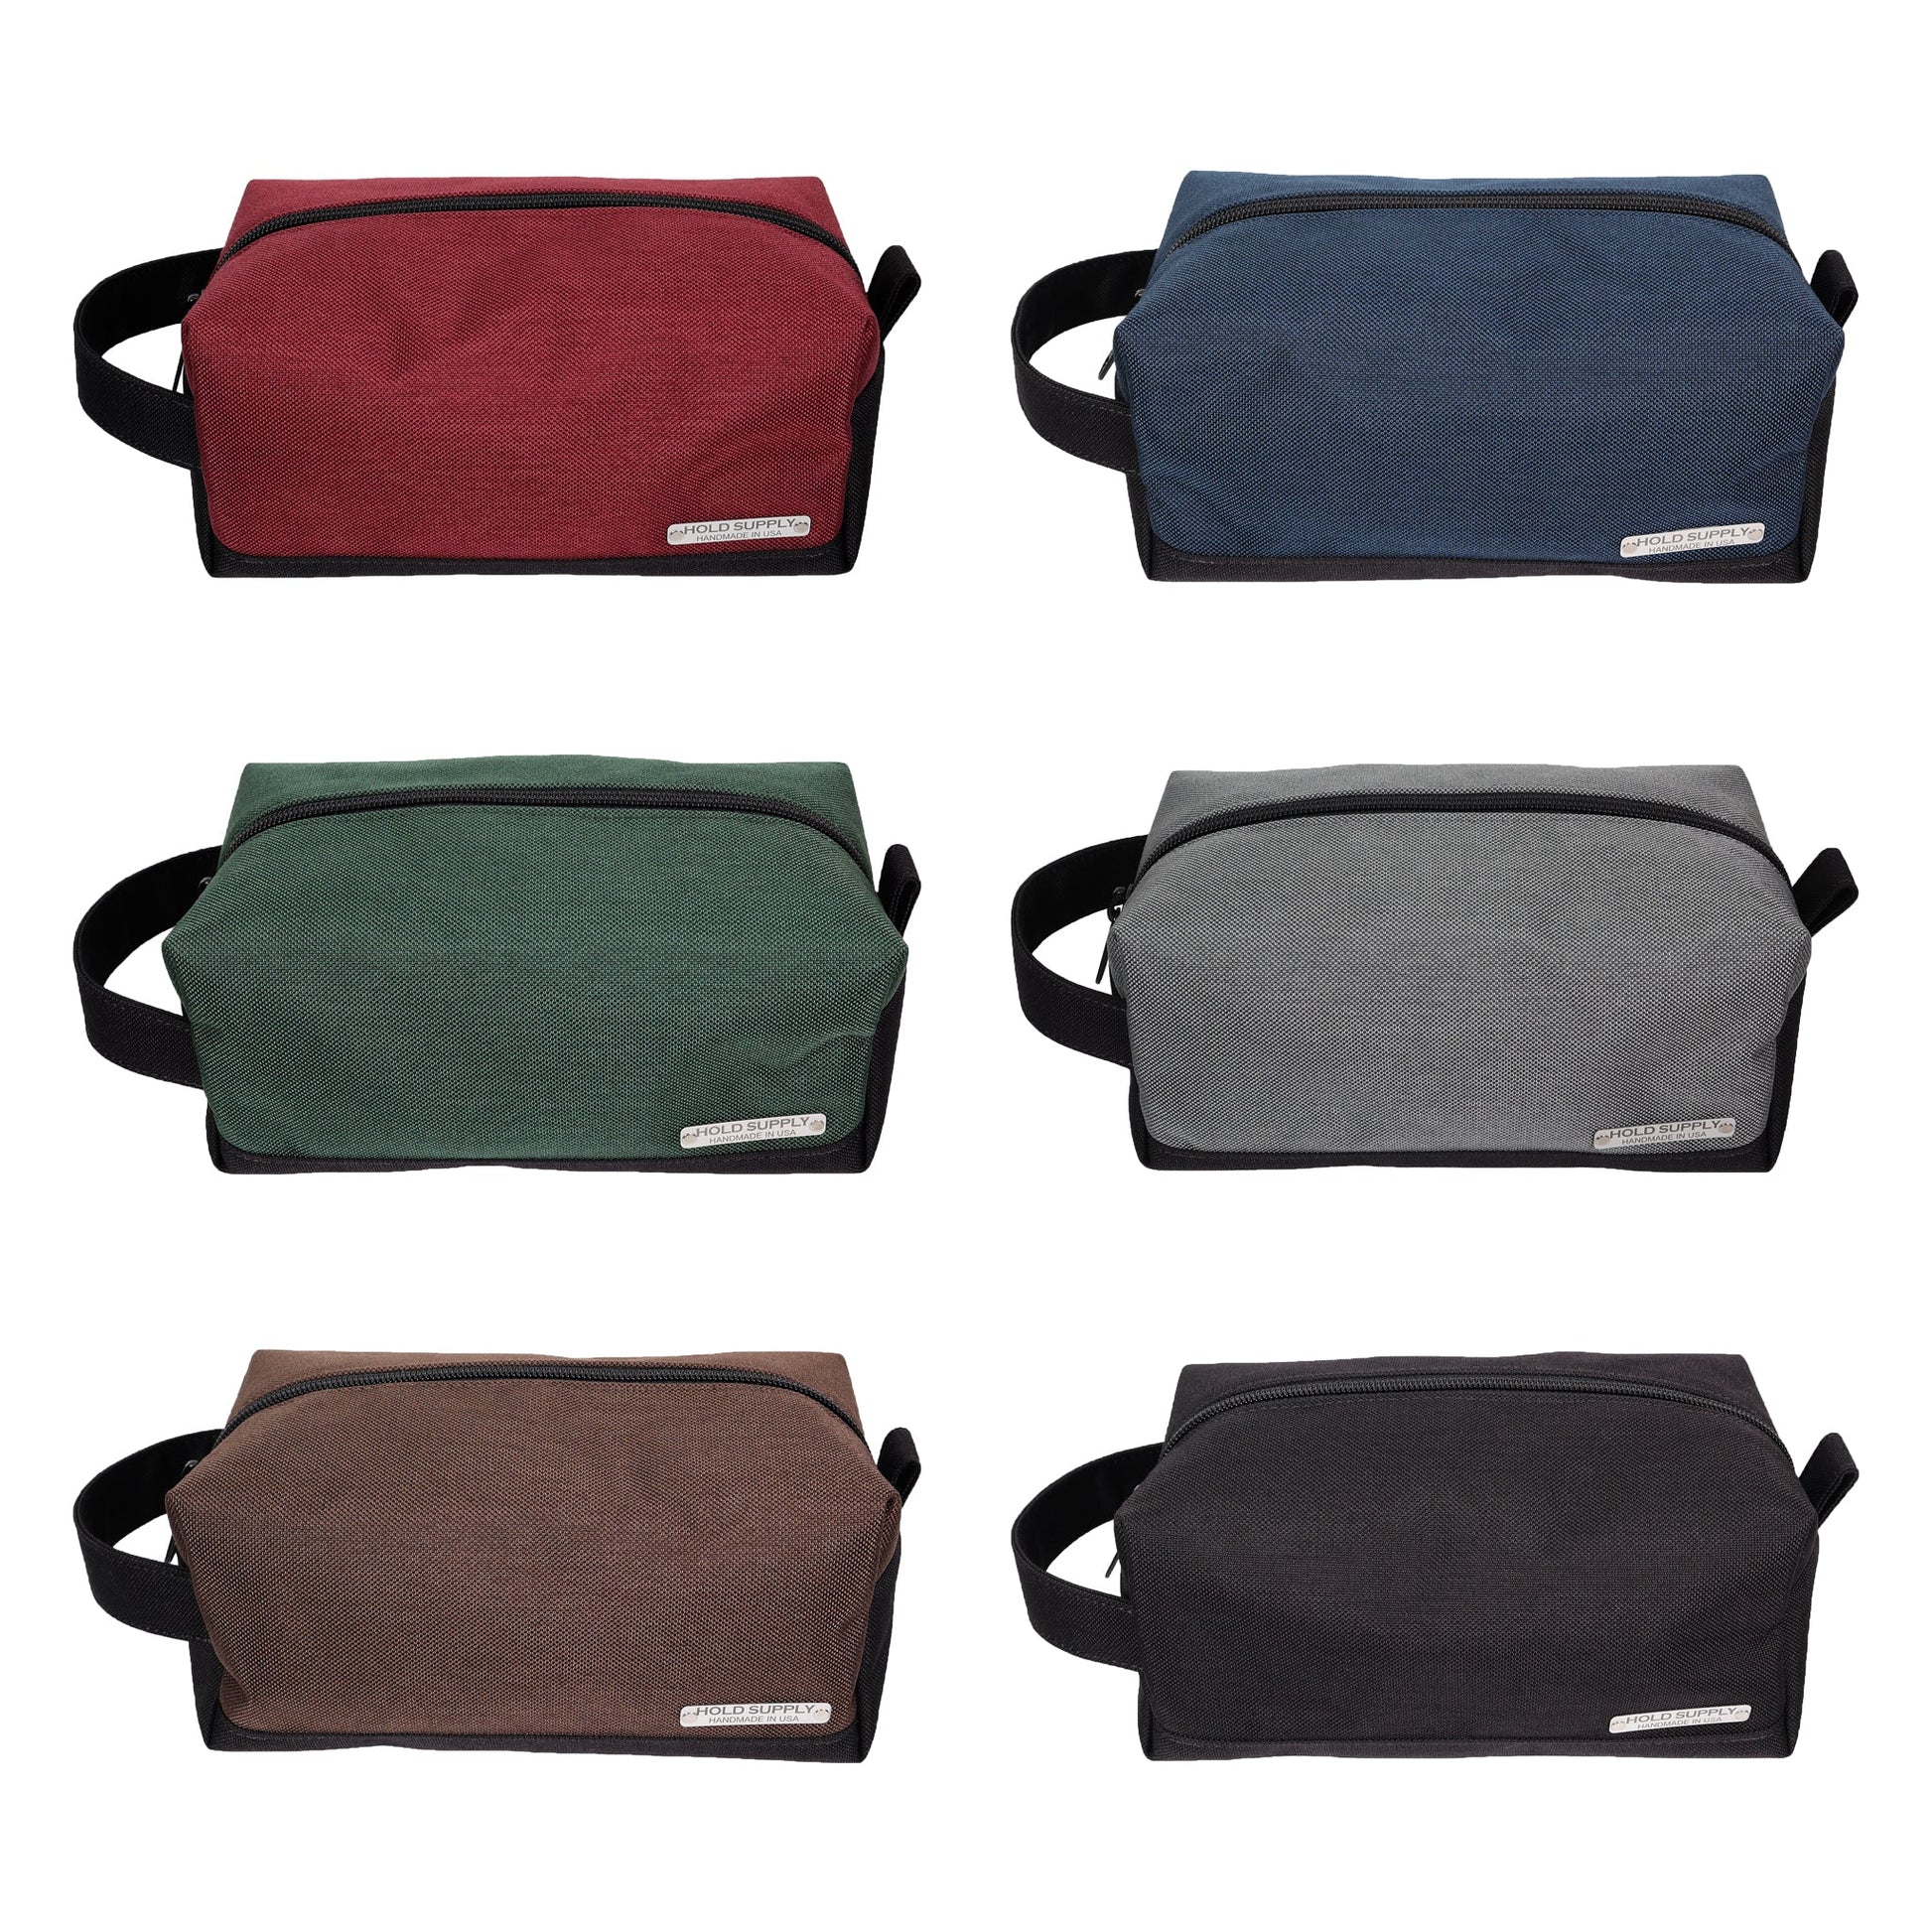 Gray and Black Canvas Toiletry Bag